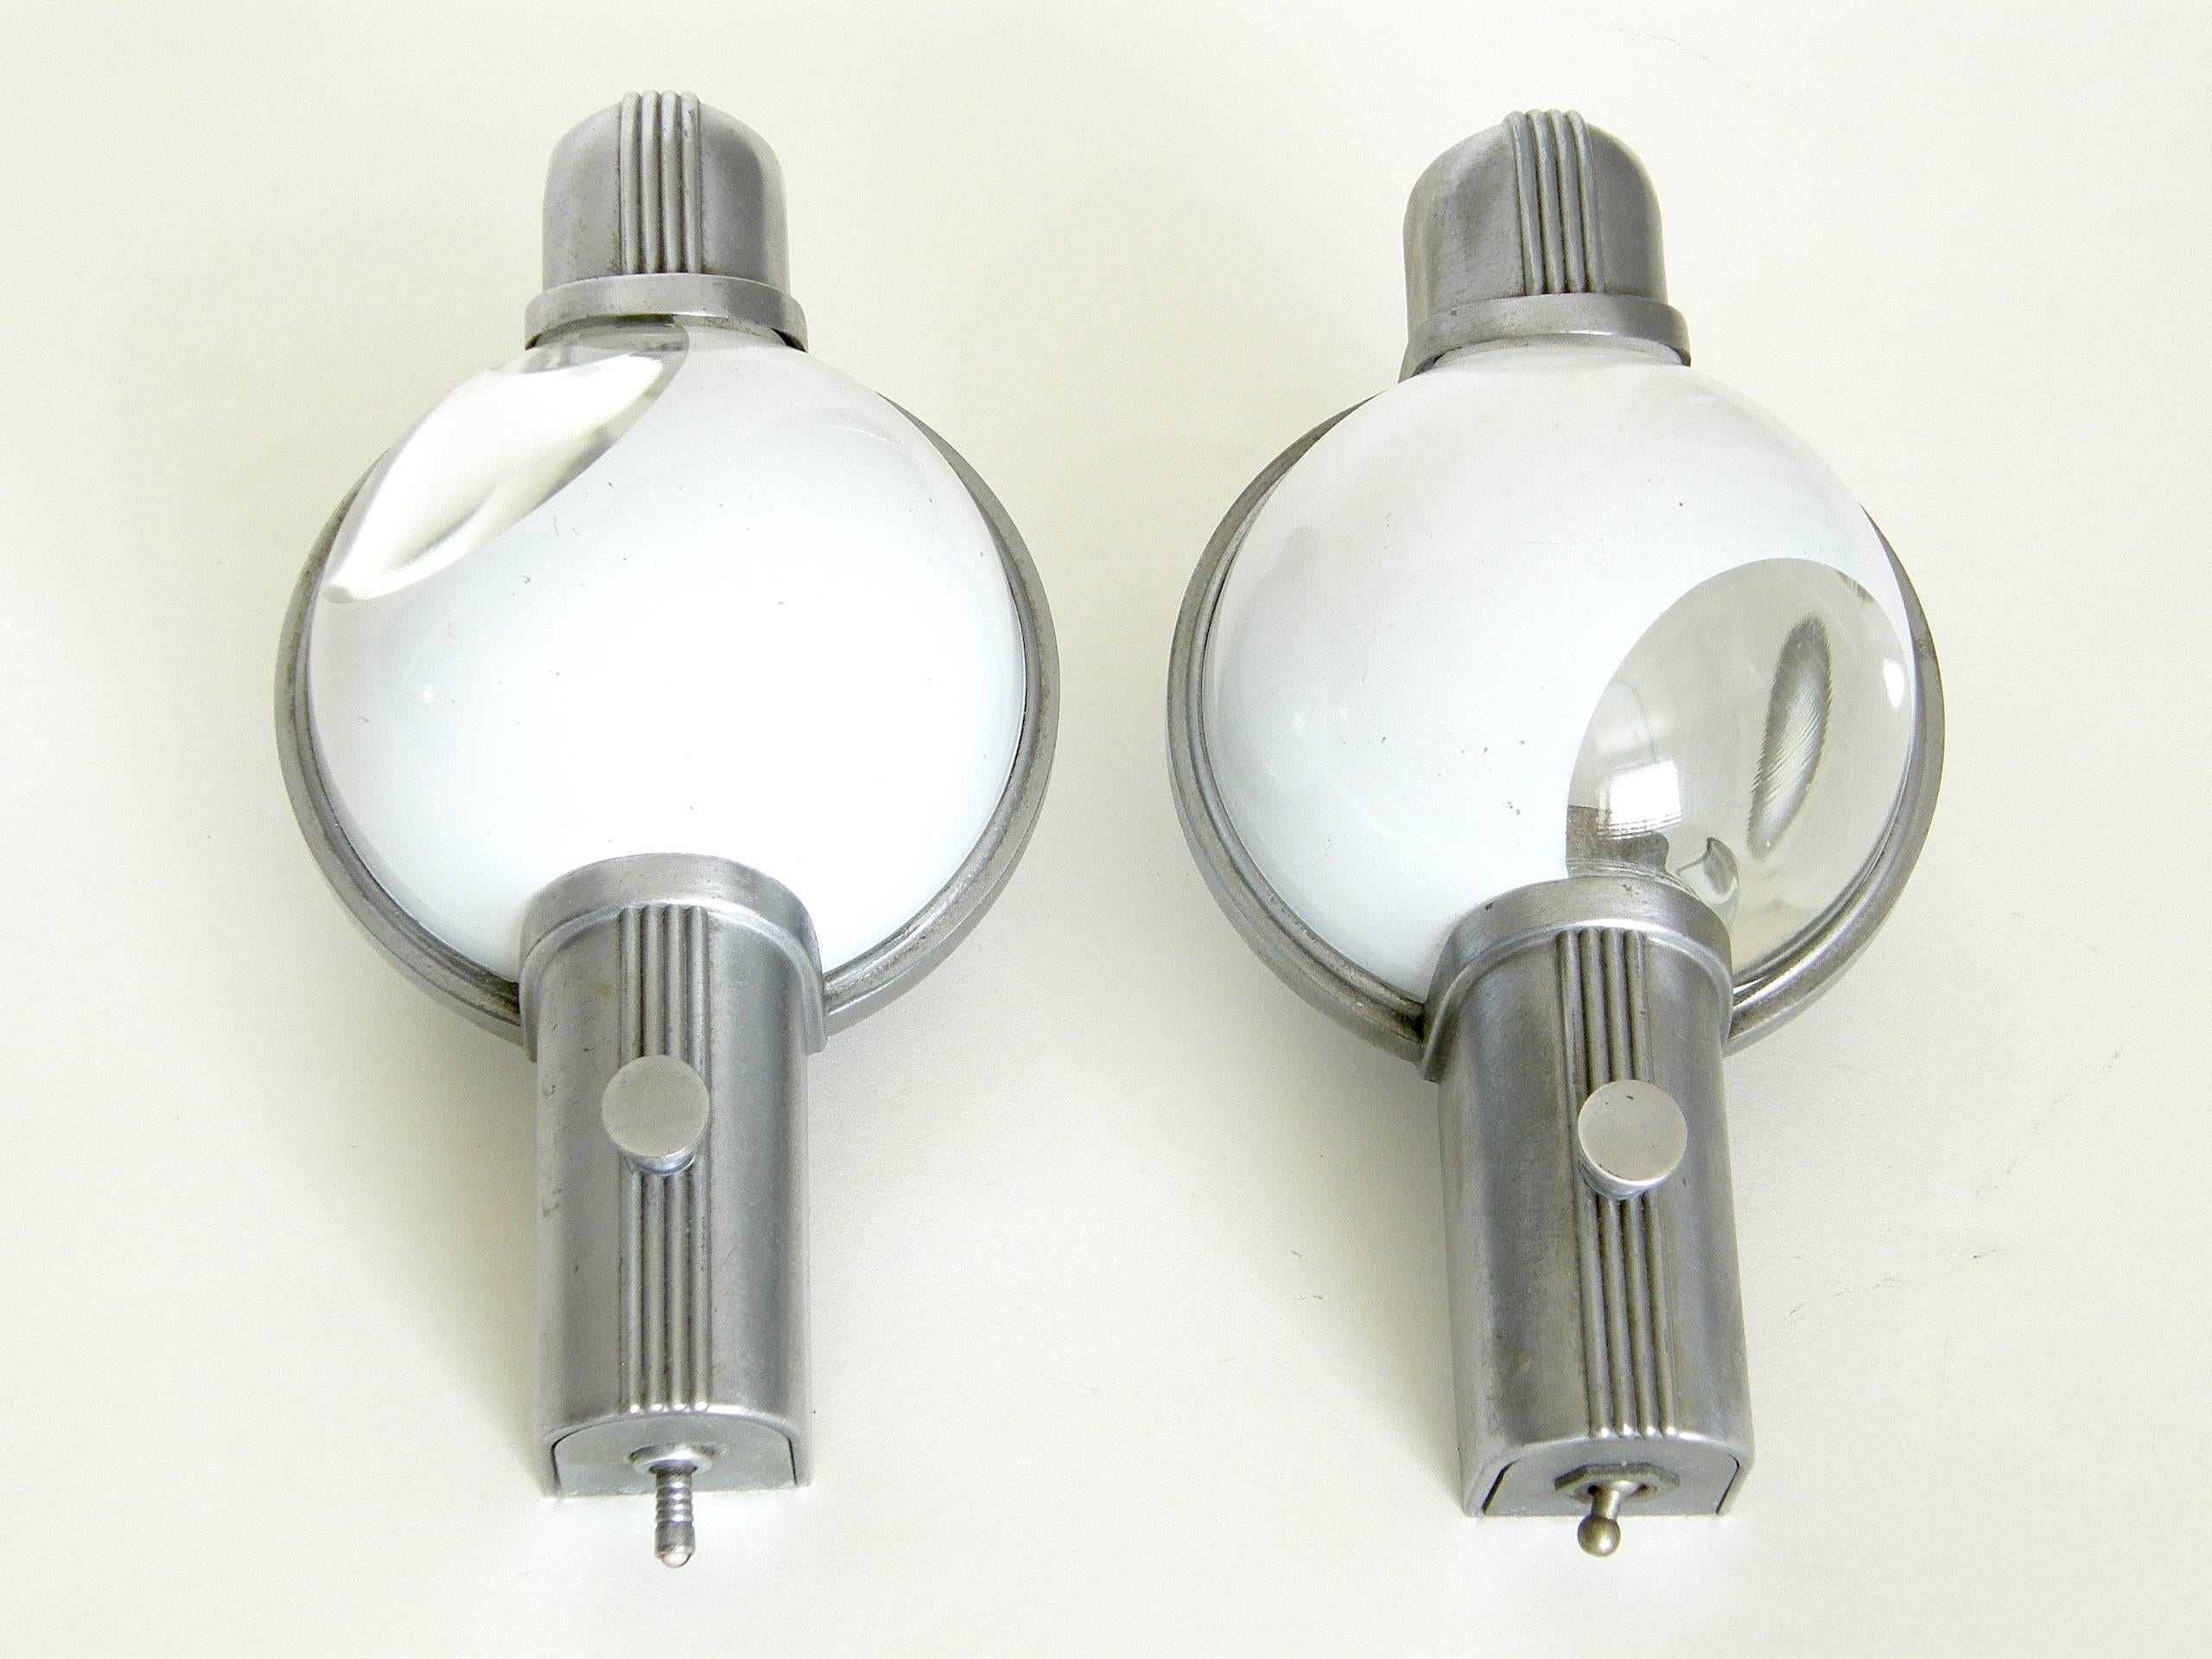 American Henry Dreyfuss Wall Lamps for the Art Deco 20th Century Ltd Pullman Train Cars